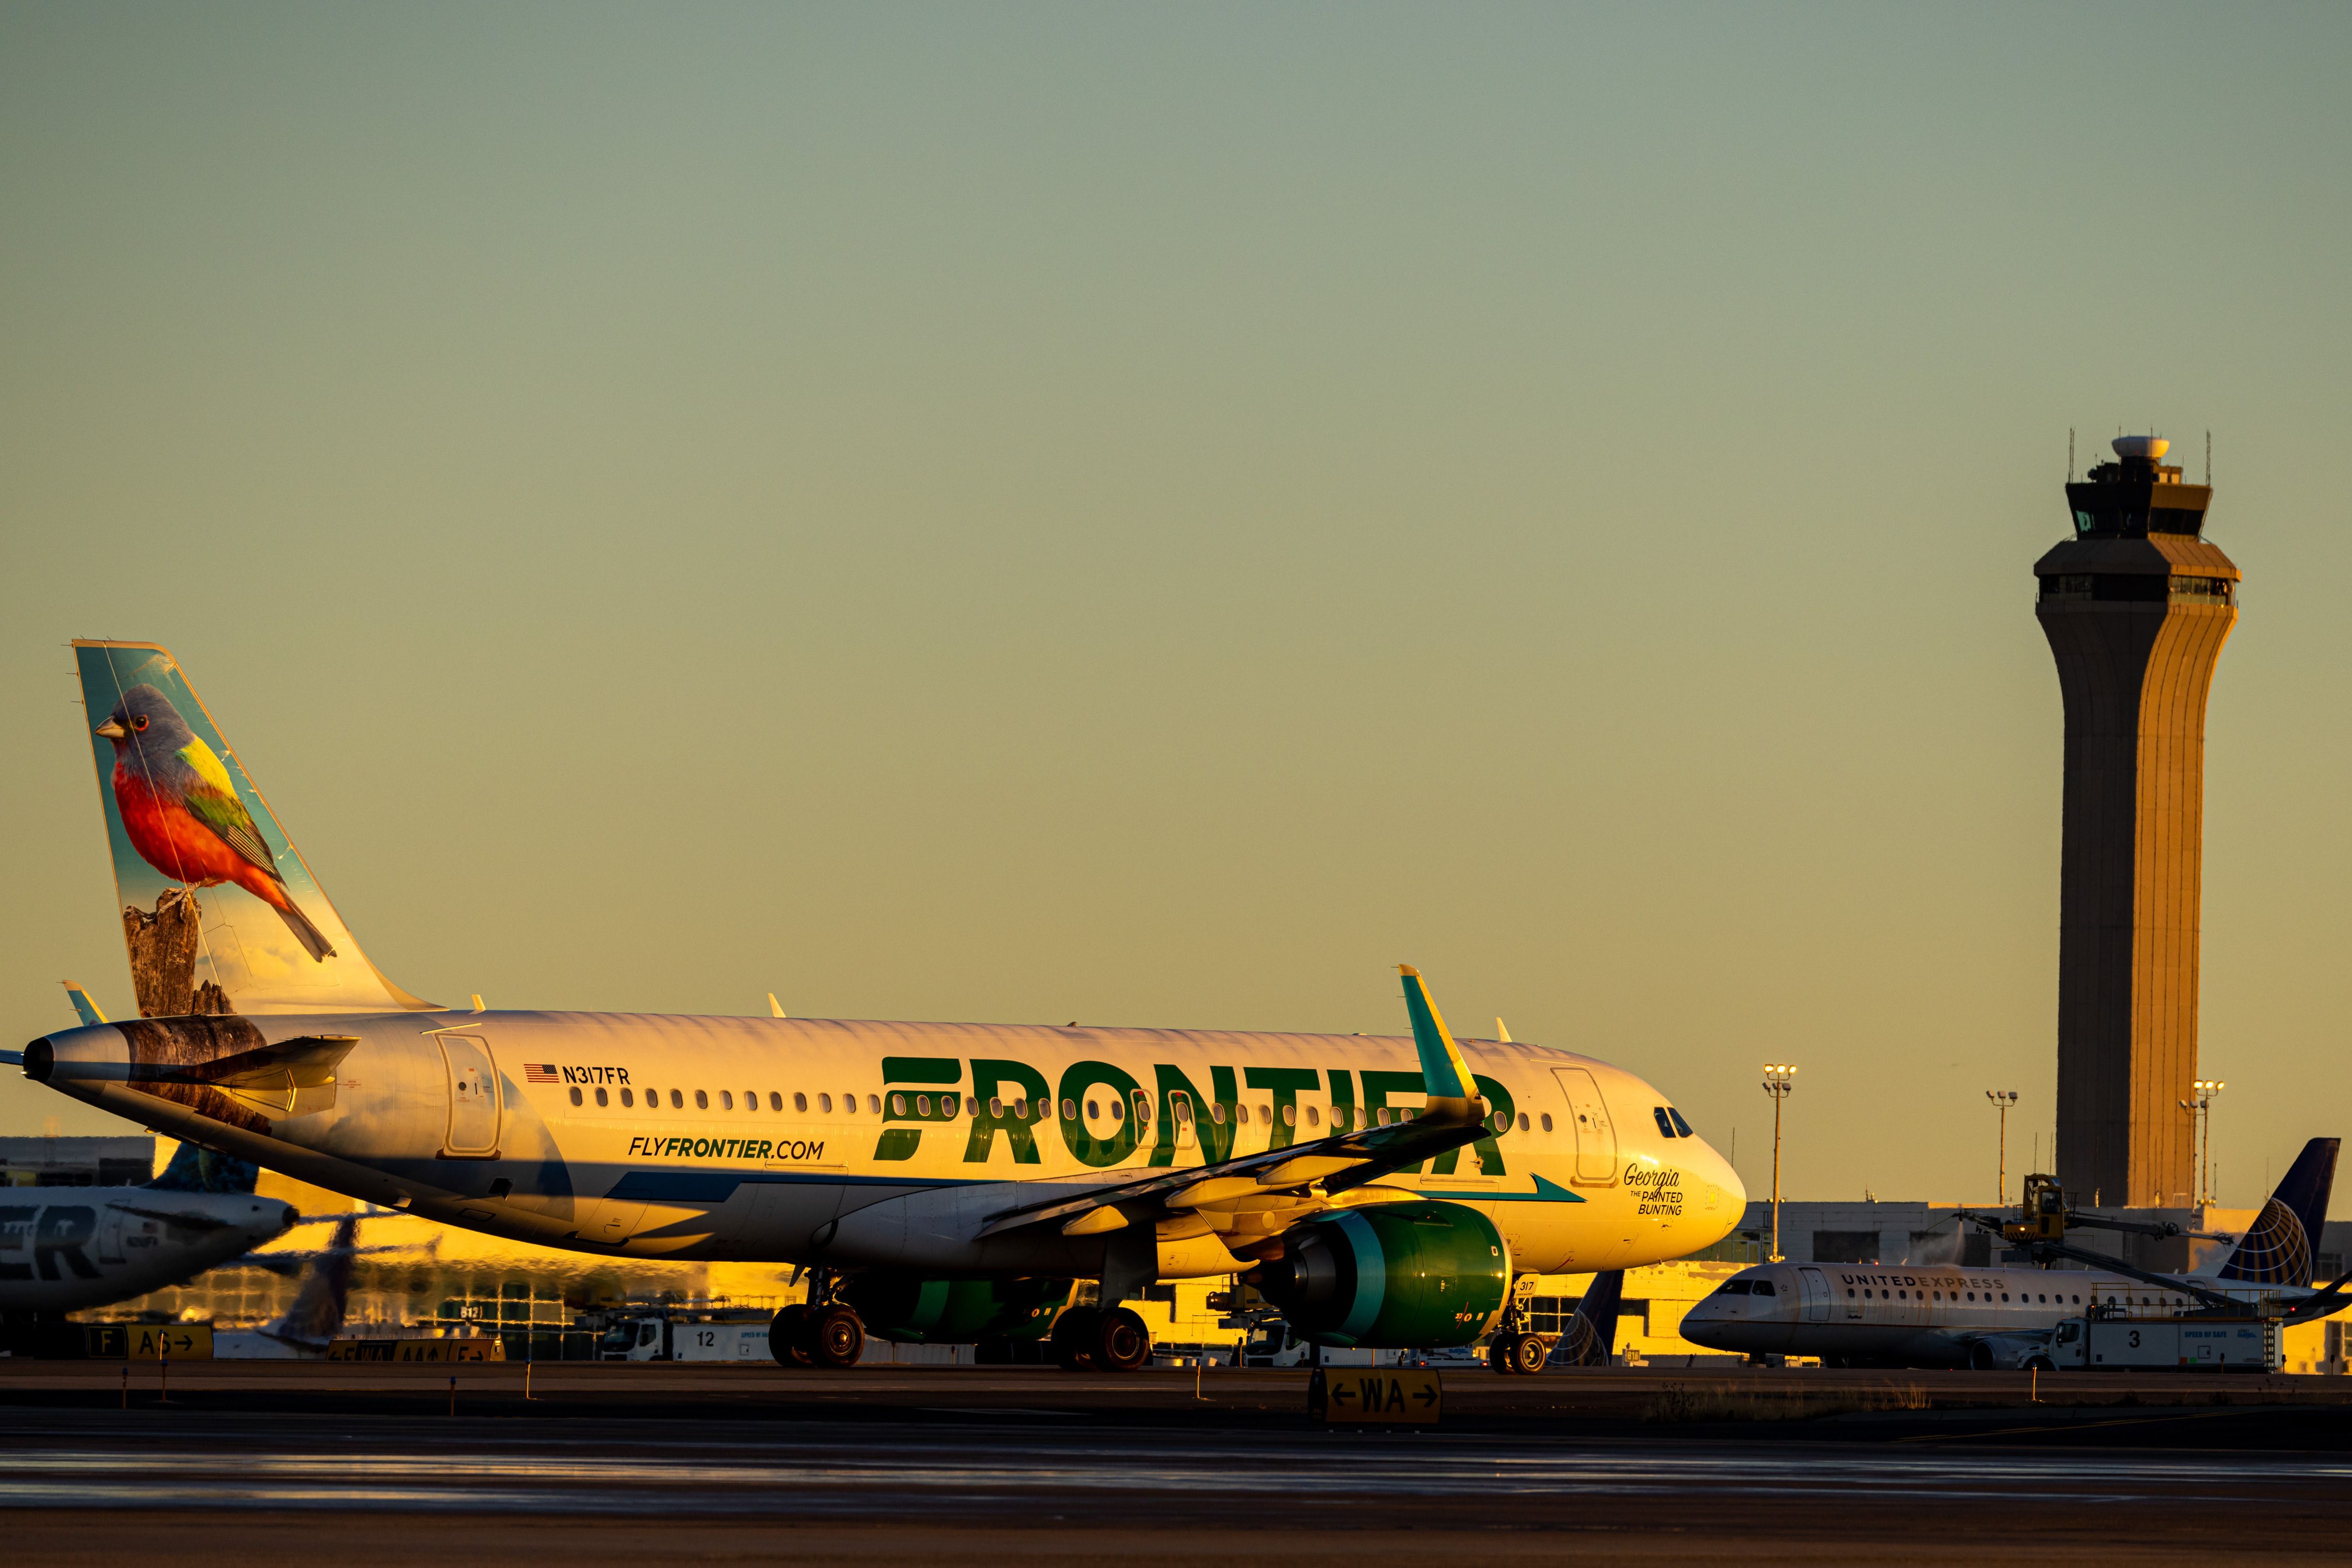 A Frontier Airlines plane in front of United Express operating for United Airlines at Denver International Airport